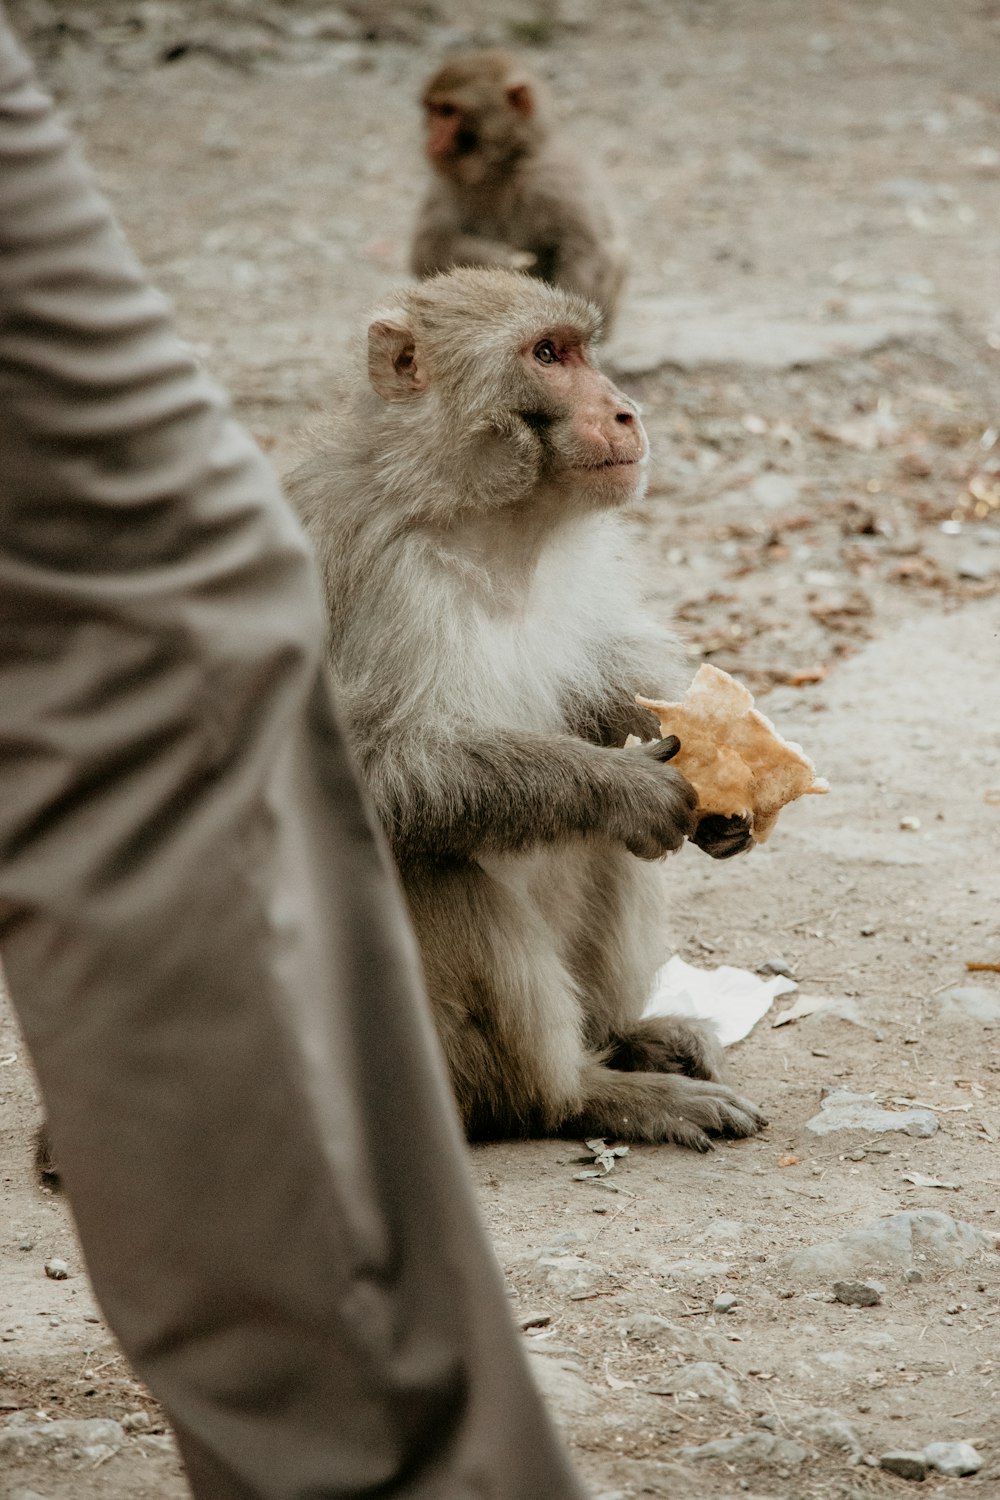 two monkeys sitting on the ground holding food